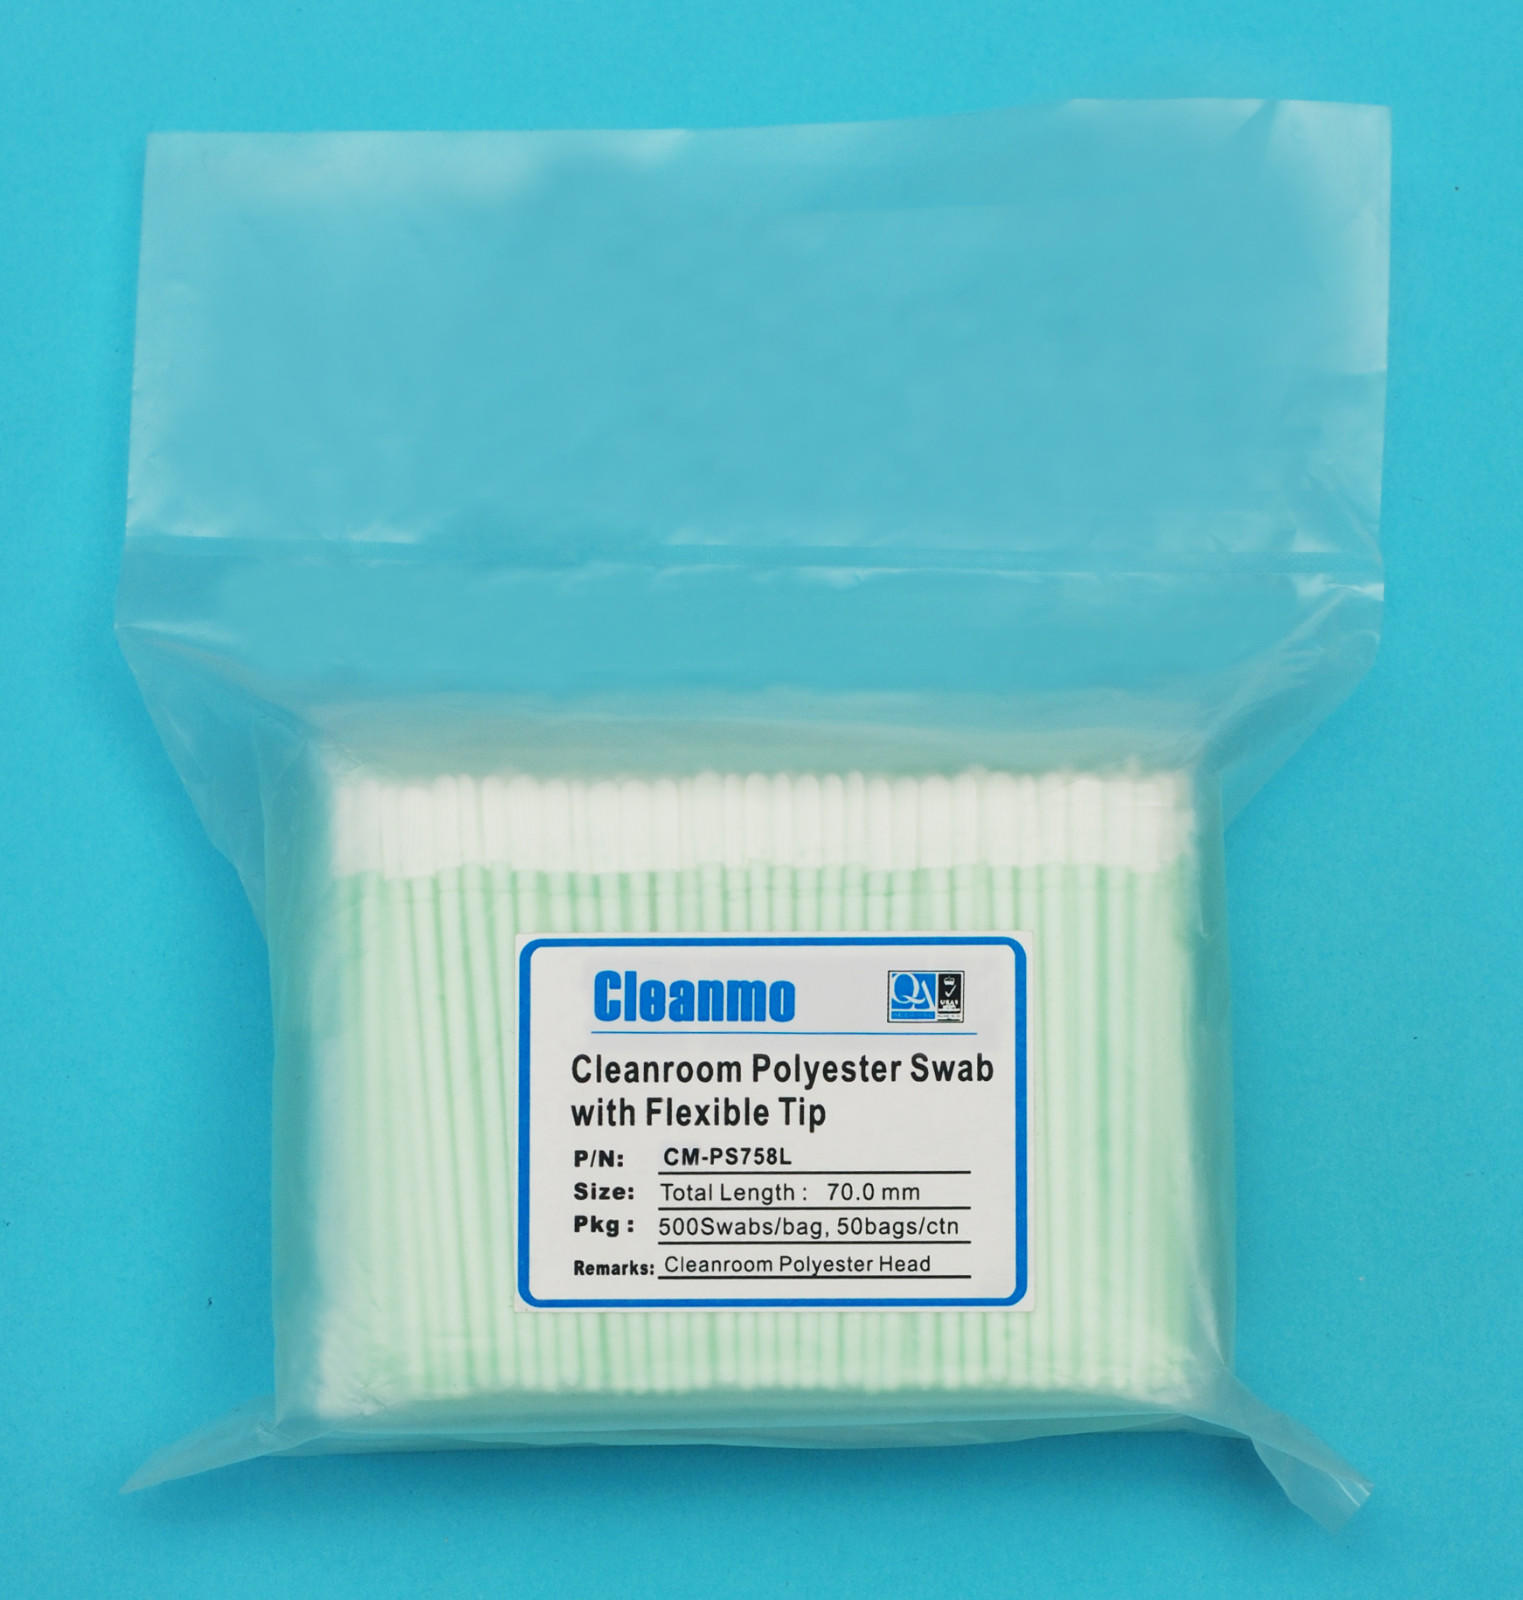 cmps761polyester electronics swap cmps707 swab Cleanmo Brand